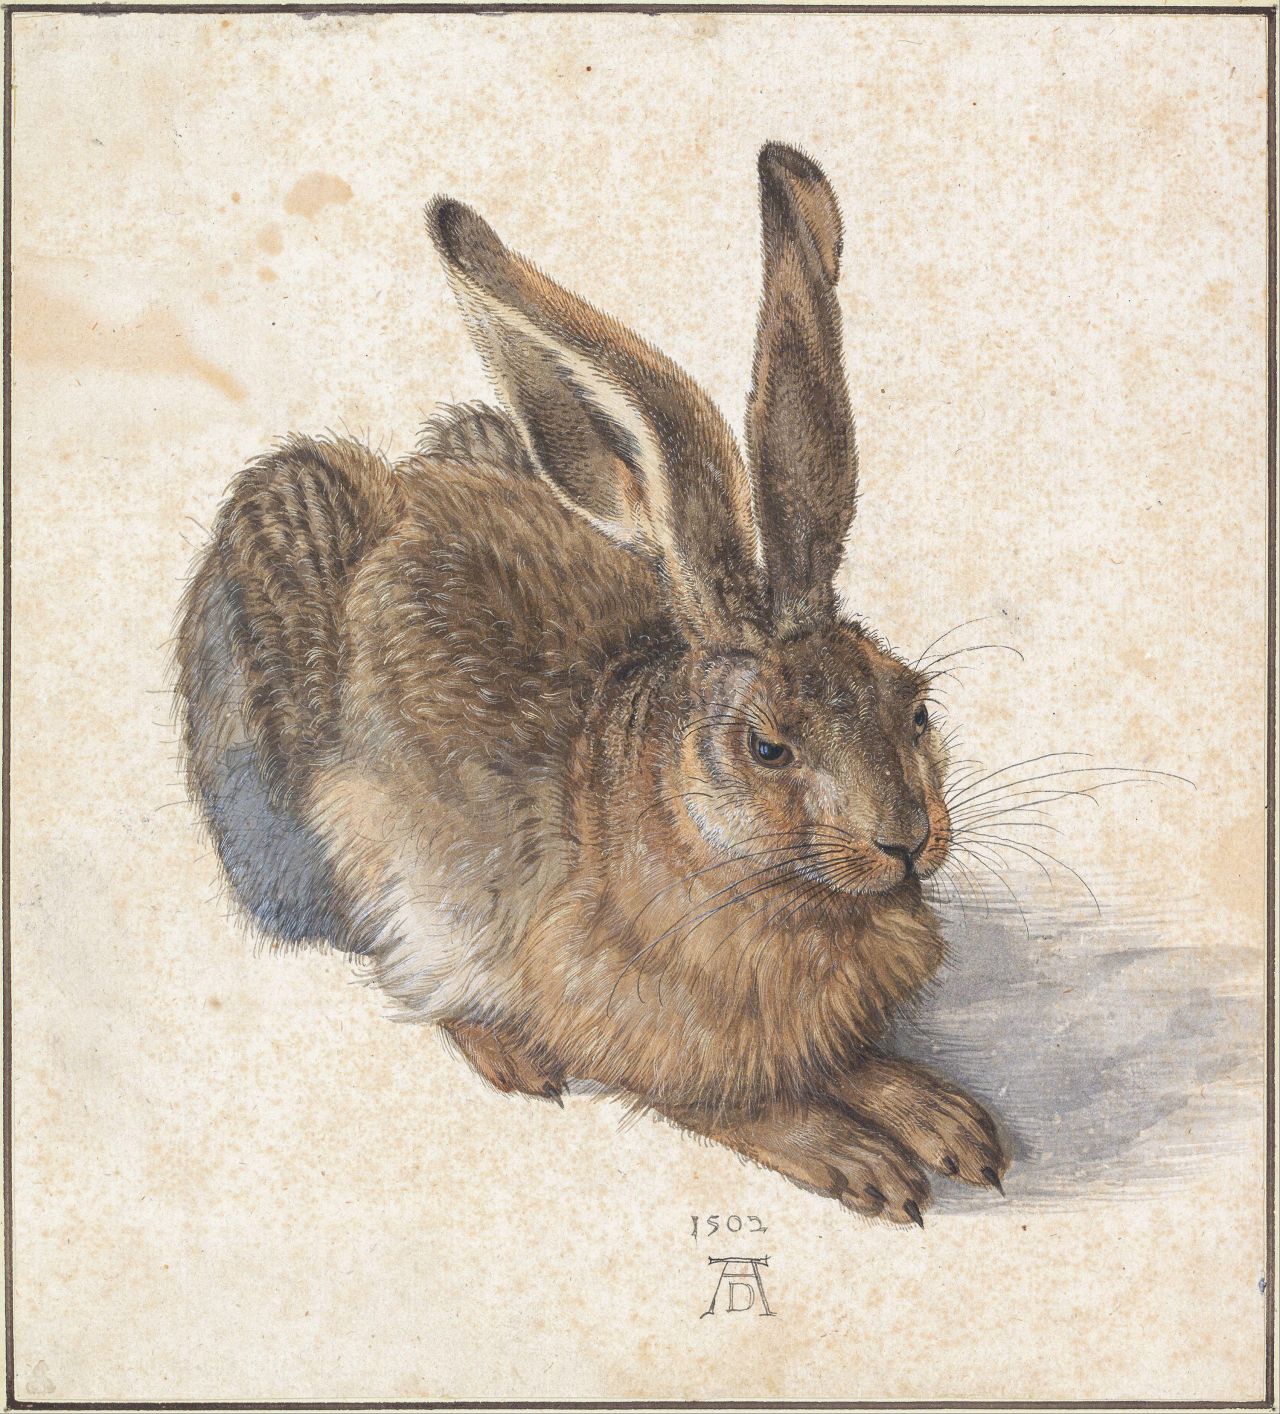 Dürer had a significant body of work. "Young Hare," completed in 1502 and pictured here, is widely regarded to be one of the artist's most celebrated works because it is indicative of his observational style.